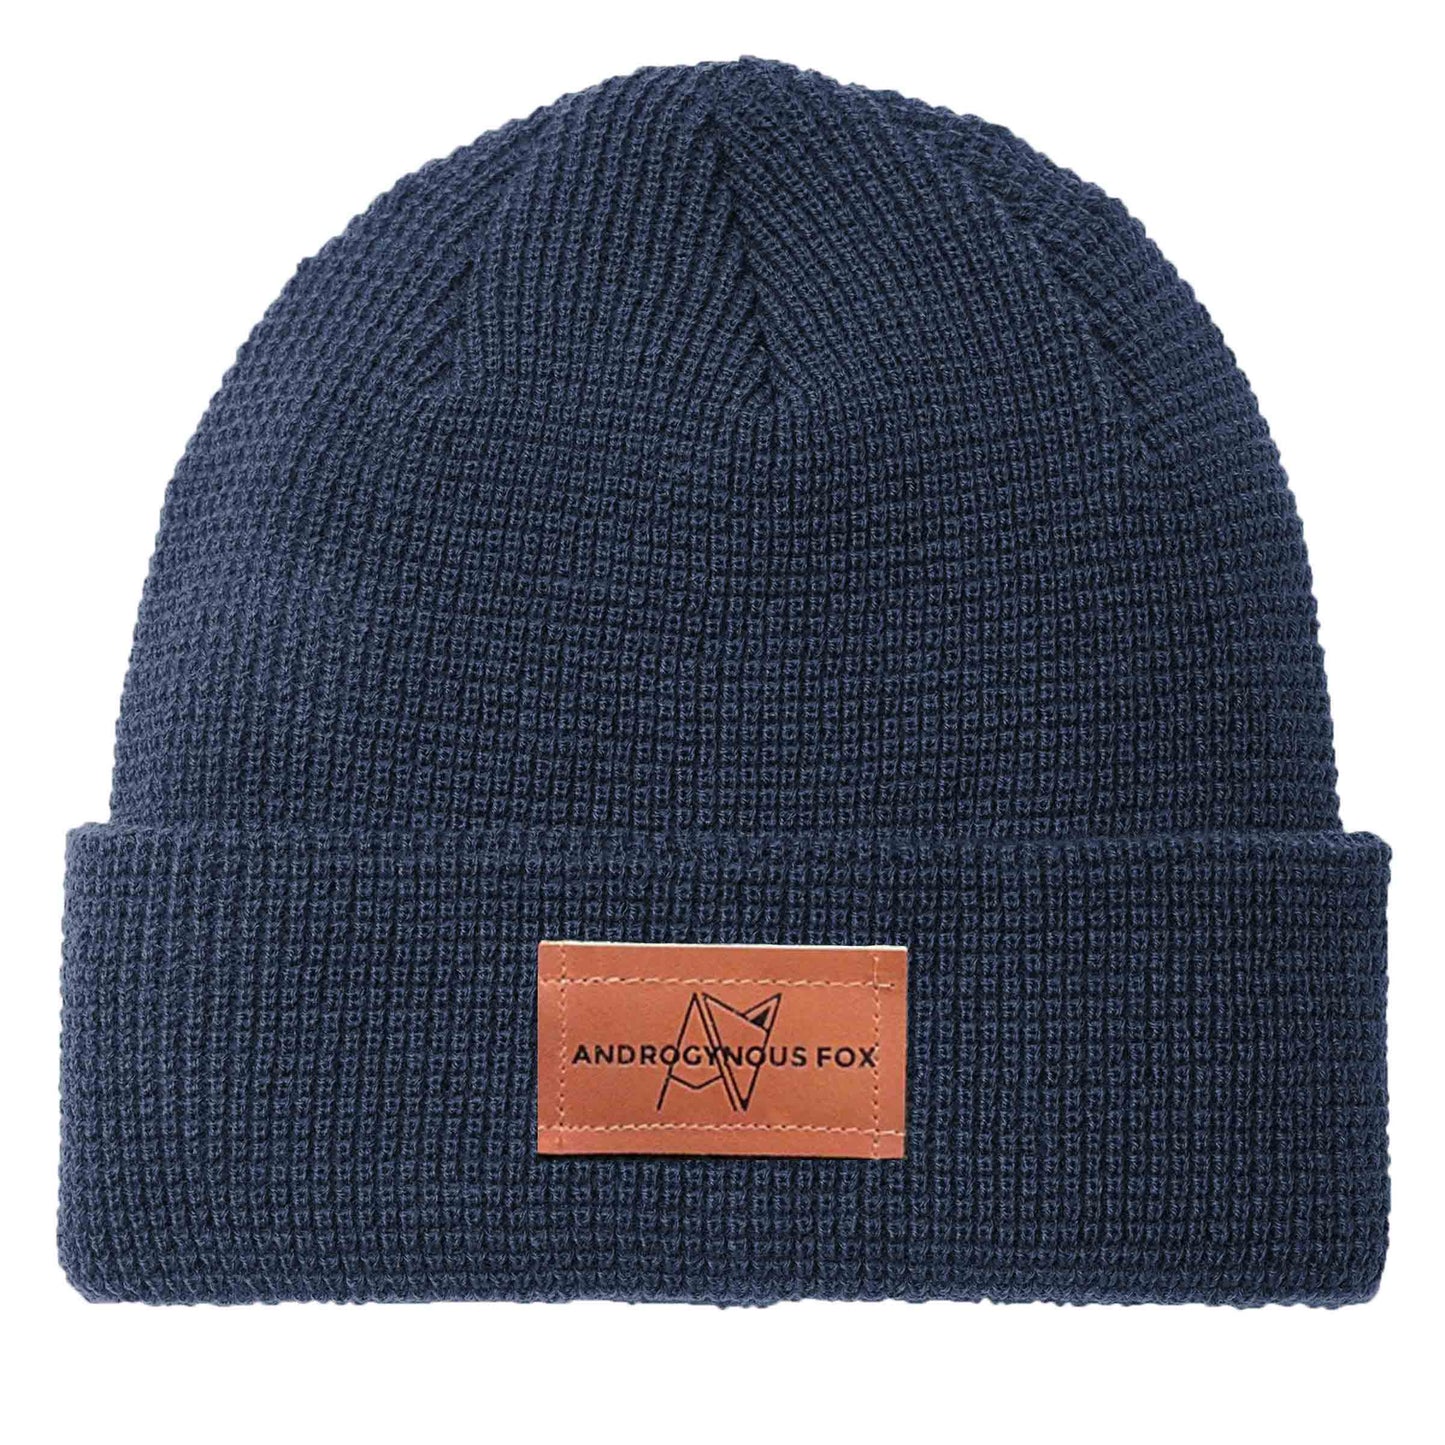 Androgynous Fox Thermal Knit Beanie